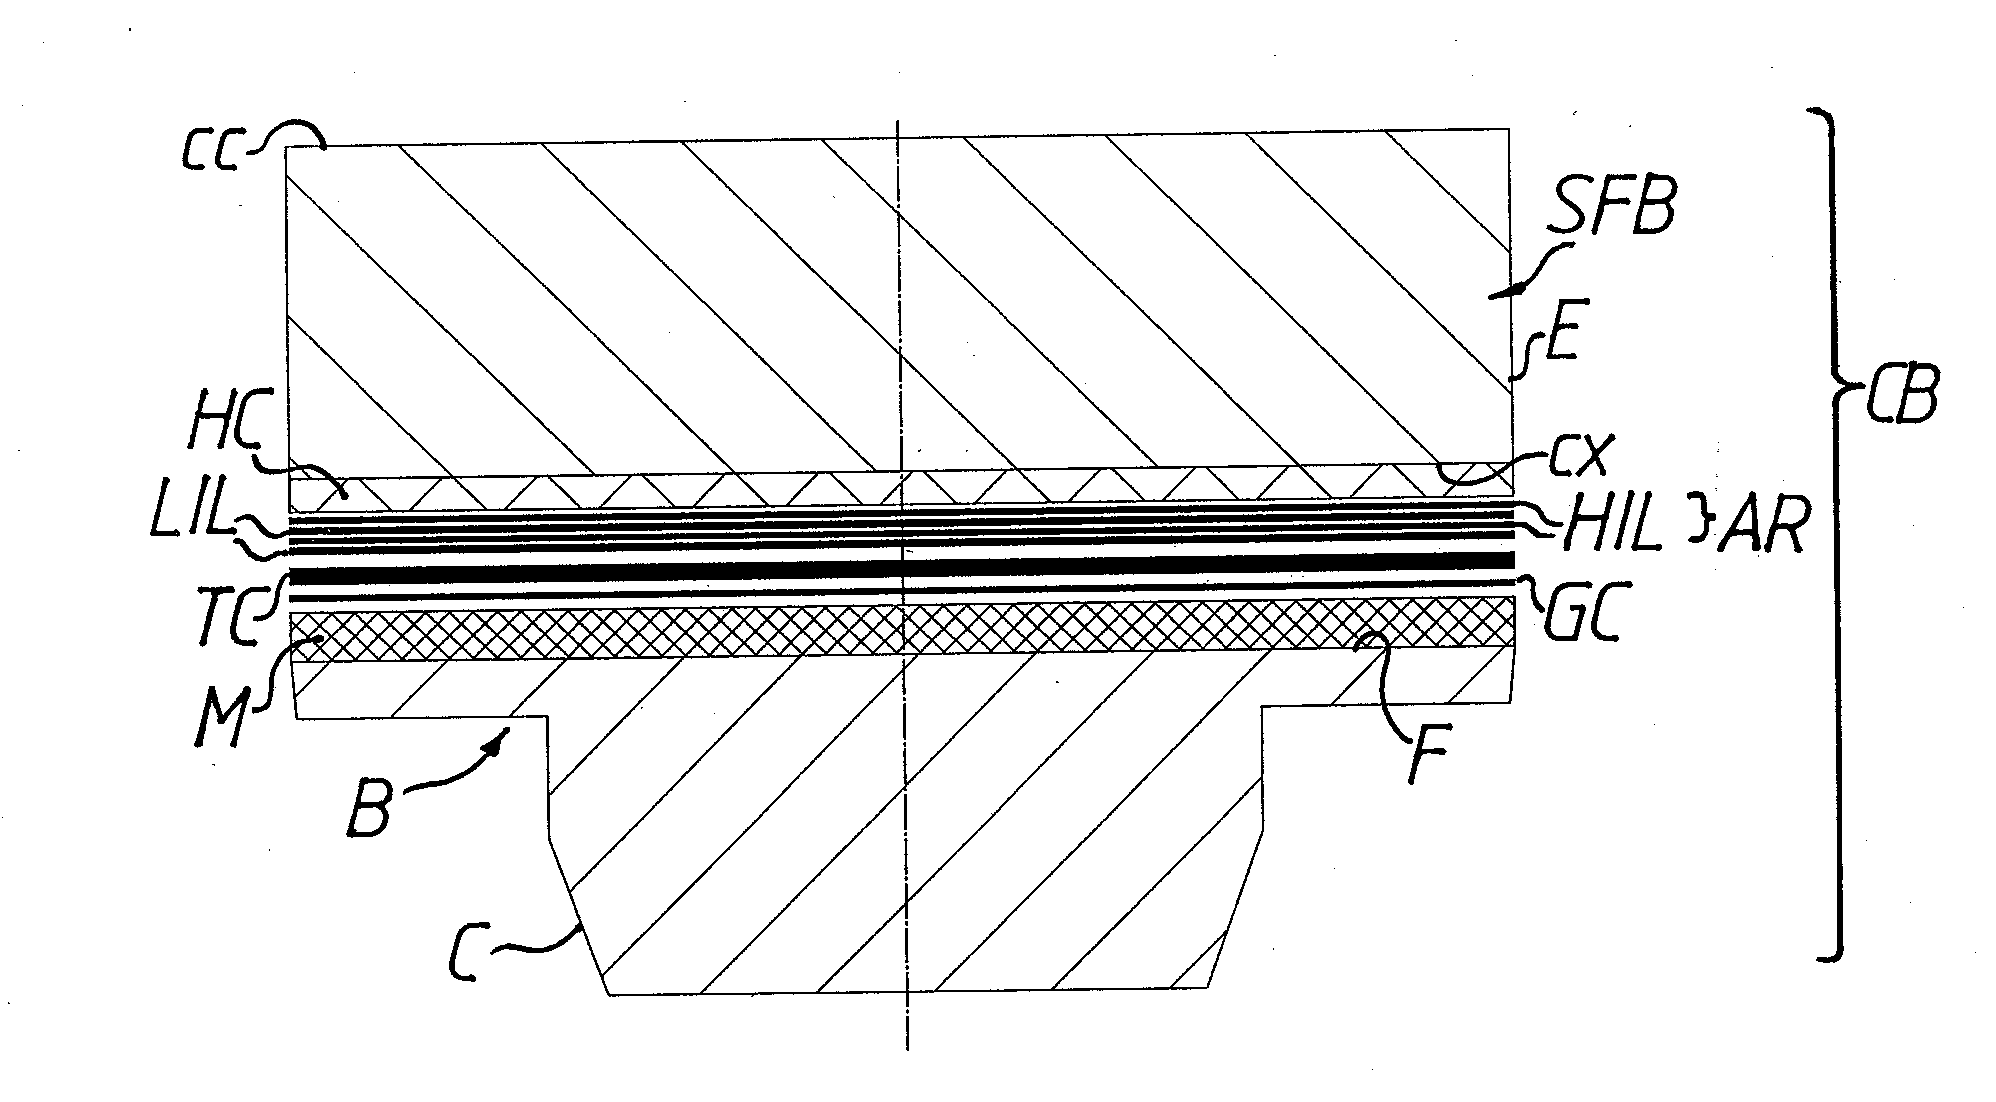 Lens blank having a temporary grip coating for a method for manufacturing spectacle lenses according to a prescription